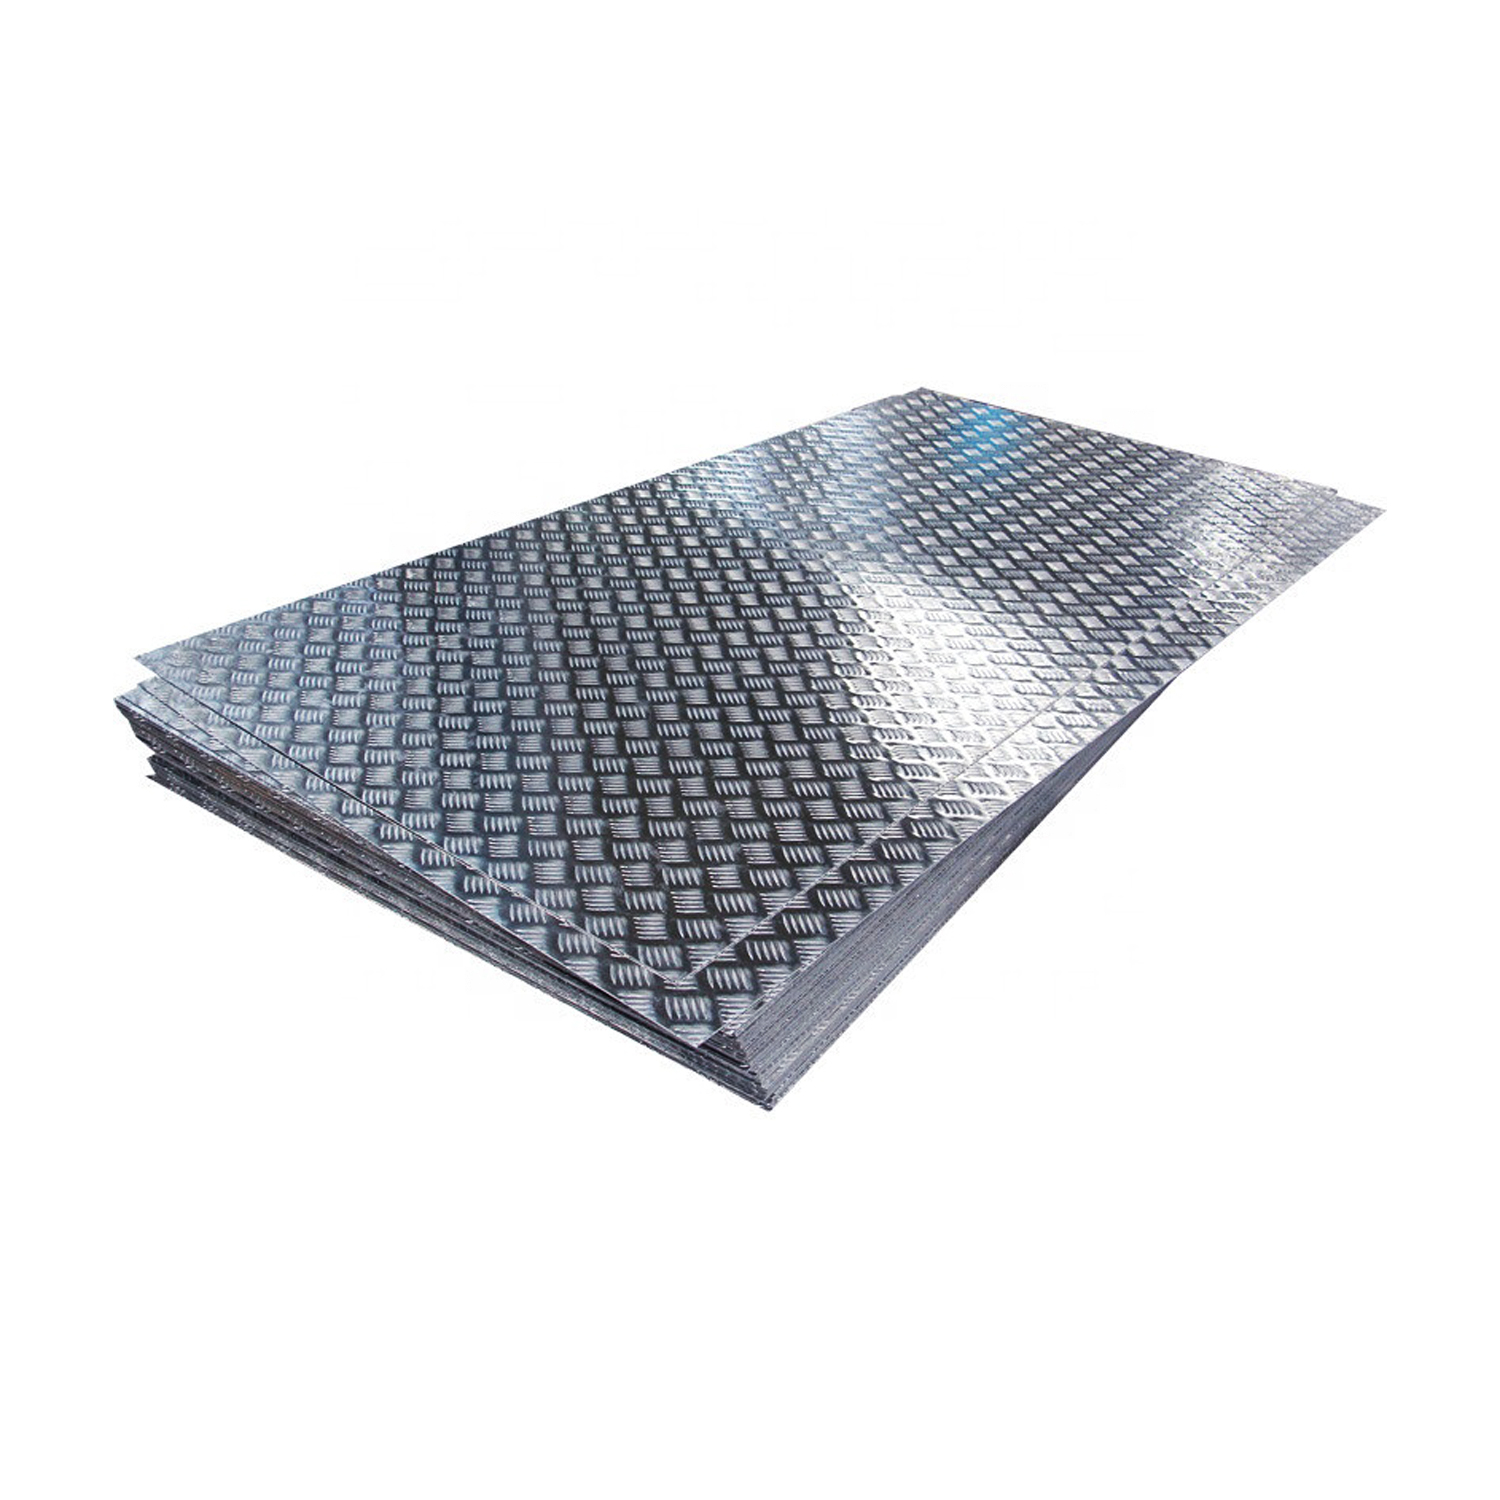 Chinese Stainless Steel Manufacturers Custom-made 304 316 Stainless Steel Checkered Plate Pattern Size Can Be Customized